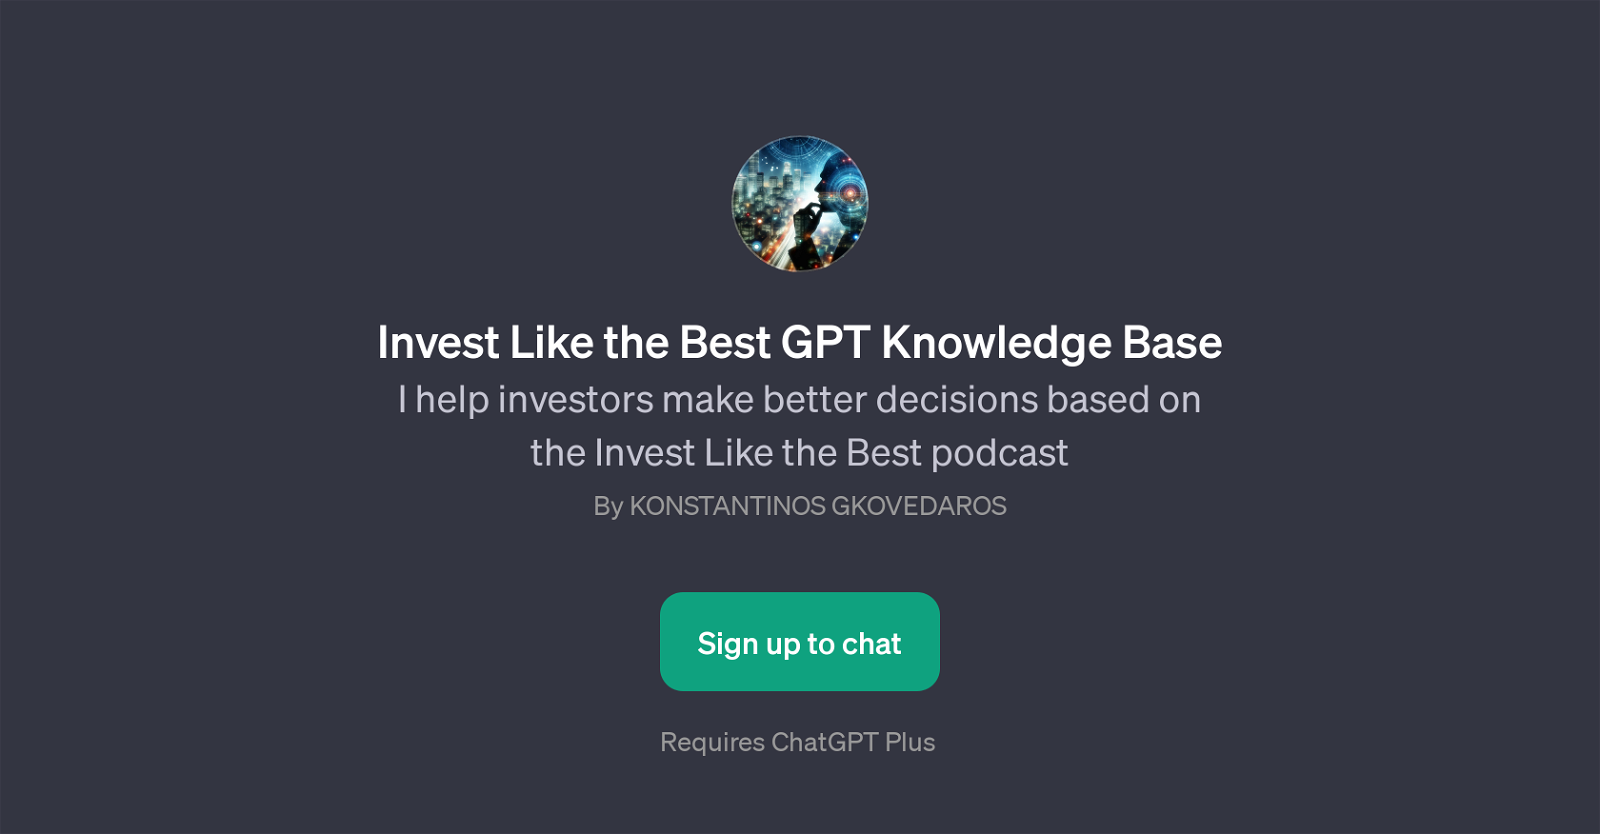 Invest Like the Best GPT Knowledge Base website